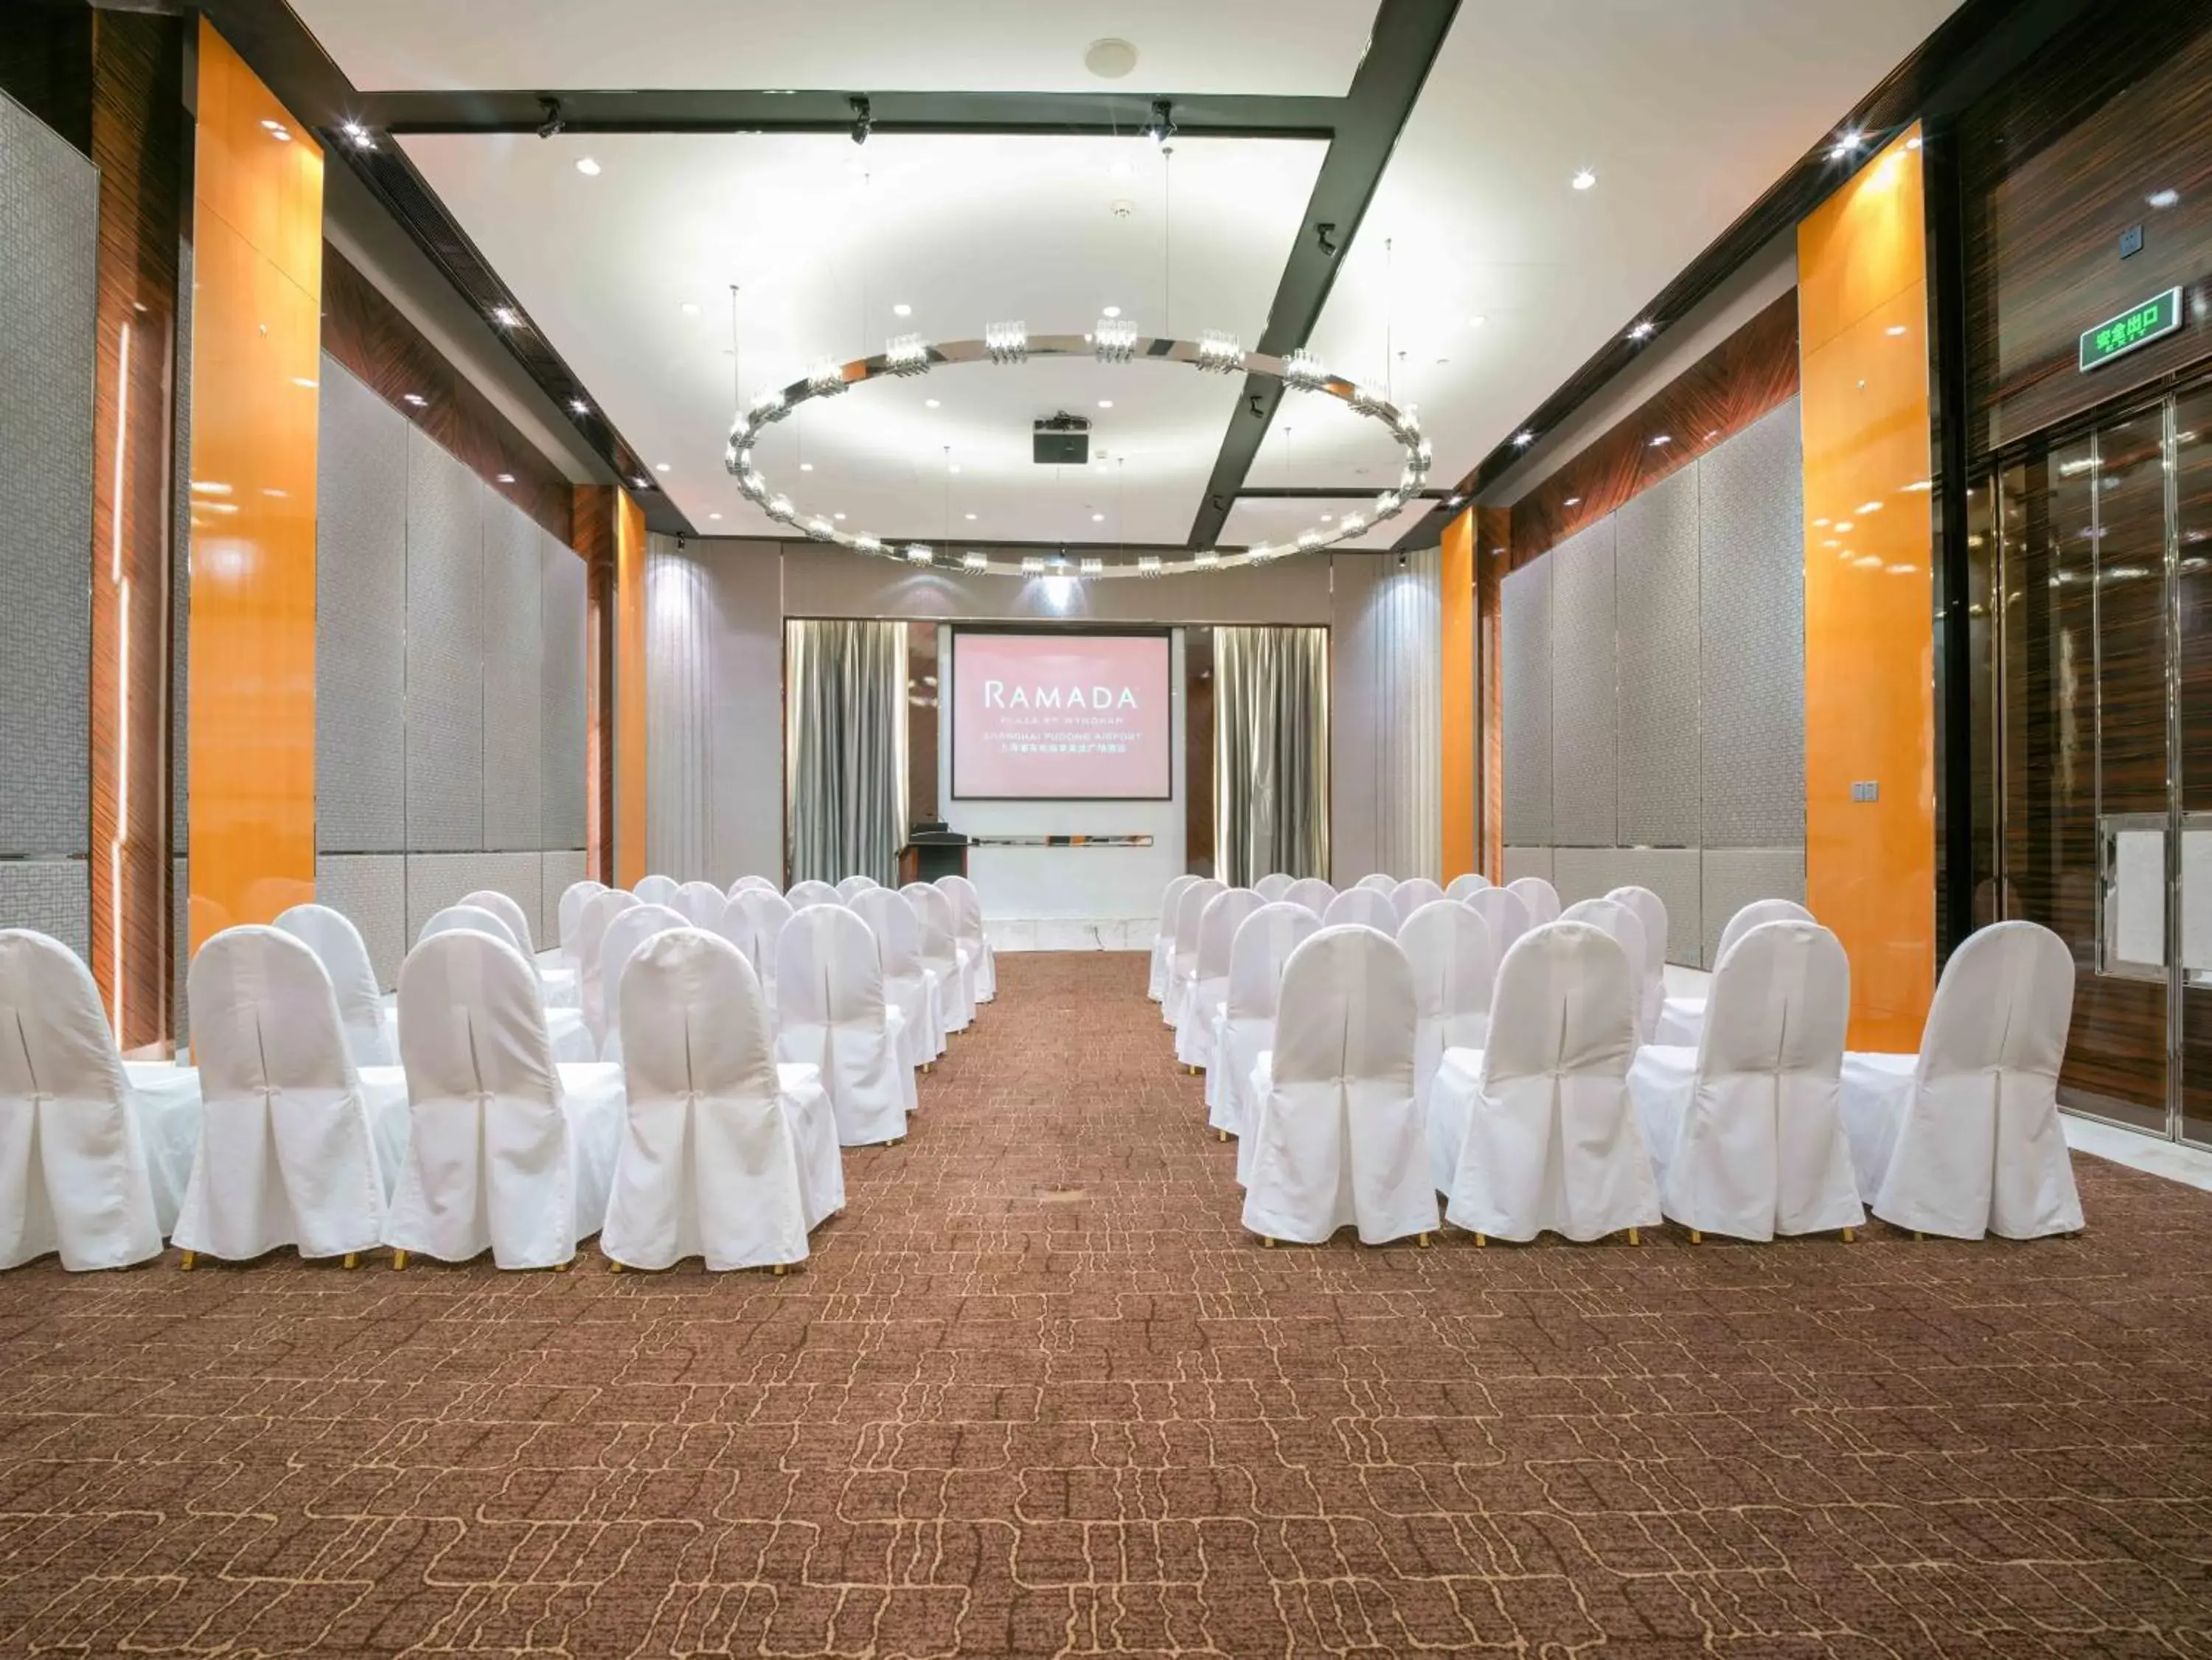 Meeting/conference room, Banquet Facilities in Ramada Plaza Shanghai Pudong Airport - A journey starts at the PVG Airport